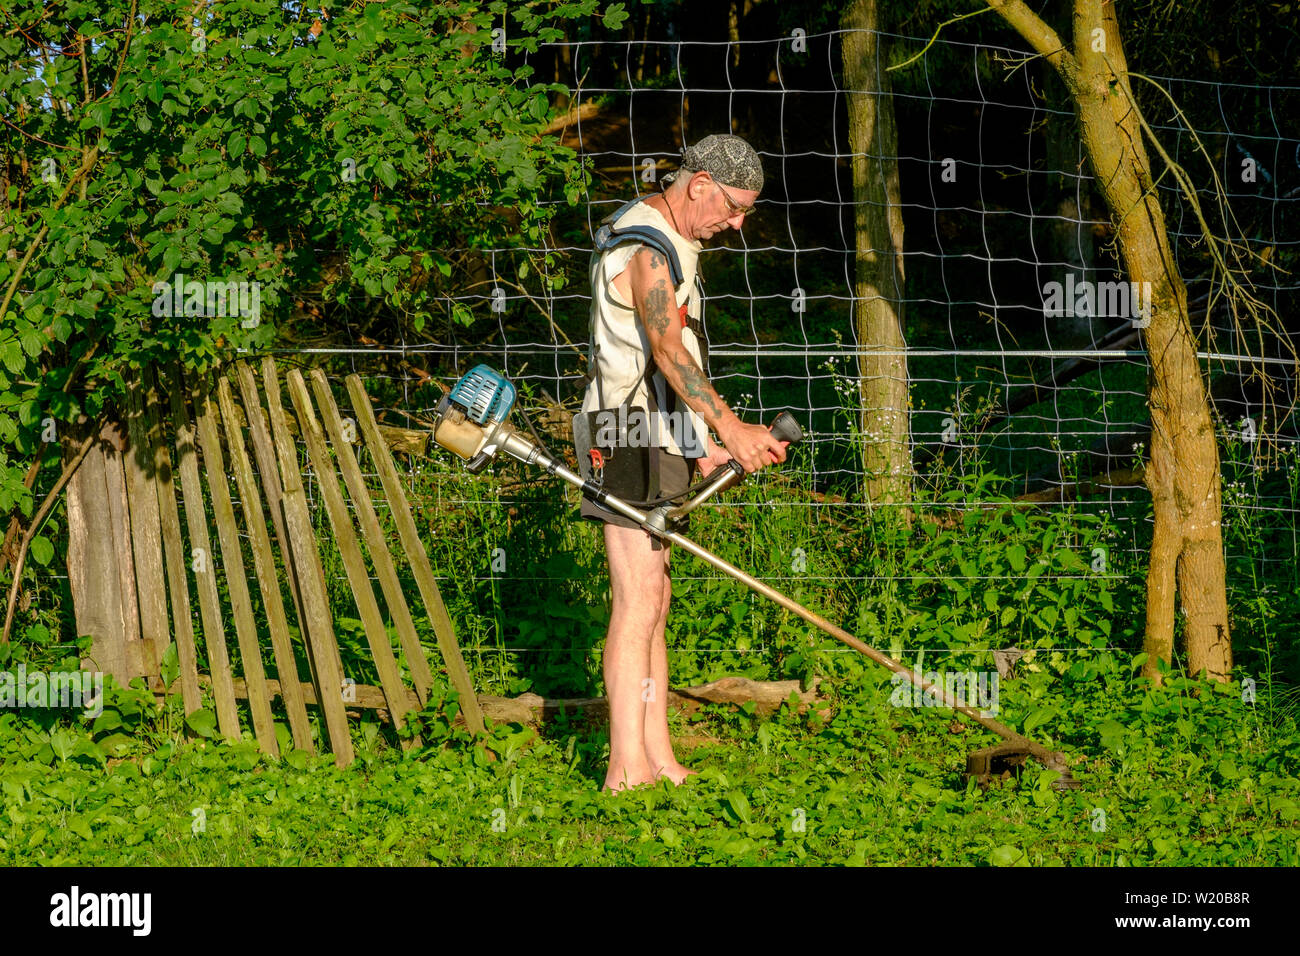 man using a strimmer to cut down grass and weeds in a garden zala county hungary Stock Photo